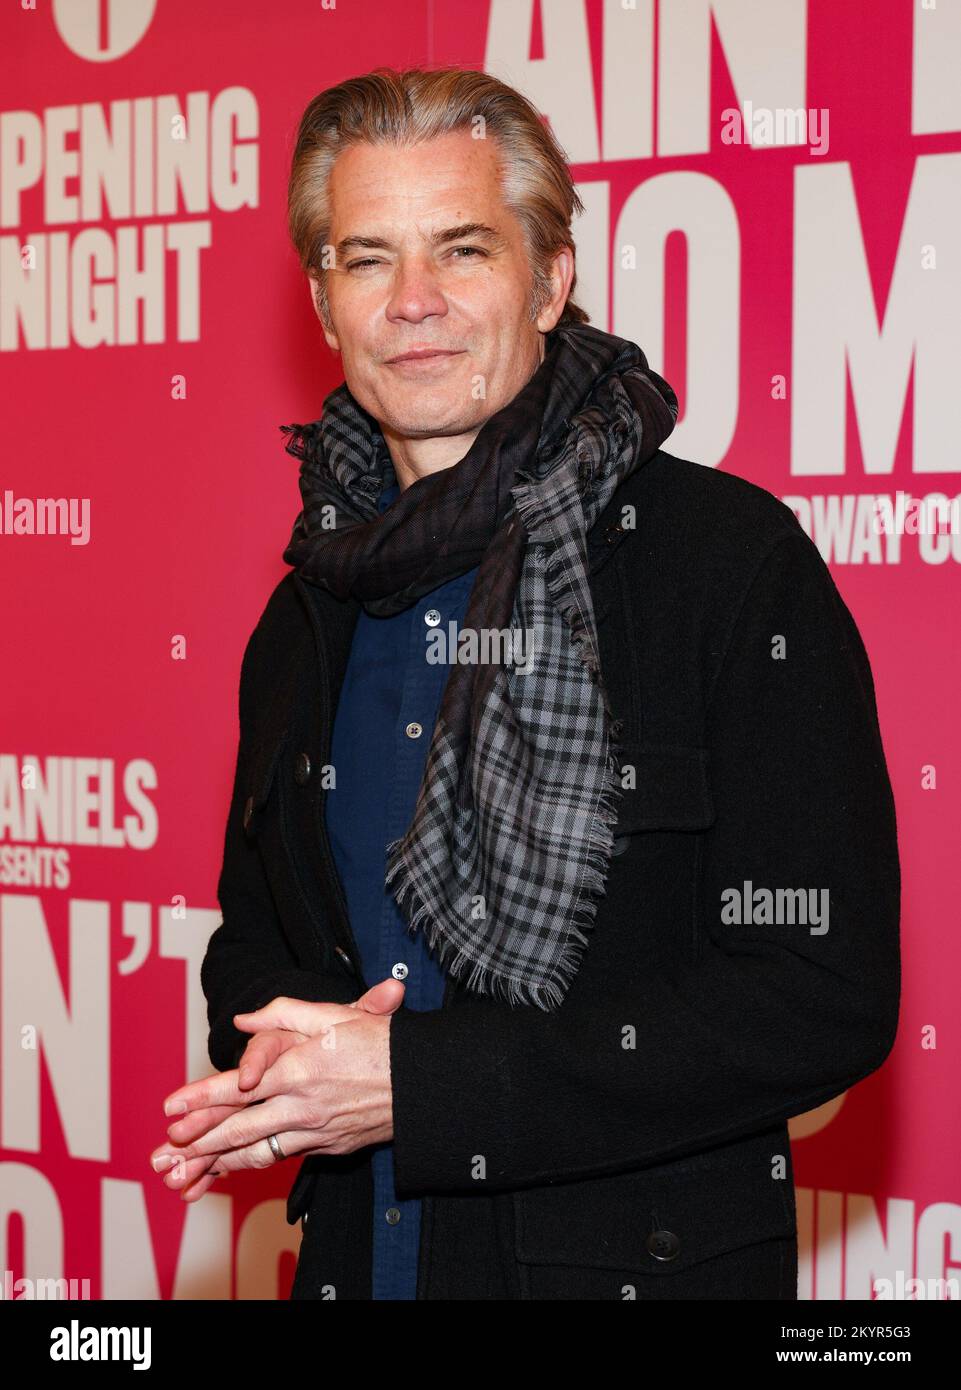 New York, NY, USA. 1st Dec, 2022. Timothy Olyphant at arrivals for AIN'T NO MO' Opening Night on Broadway, Belasco Theatre, New York, NY December 1, 2022. Credit: CJ Rivera/Everett Collection/Alamy Live News Stock Photo